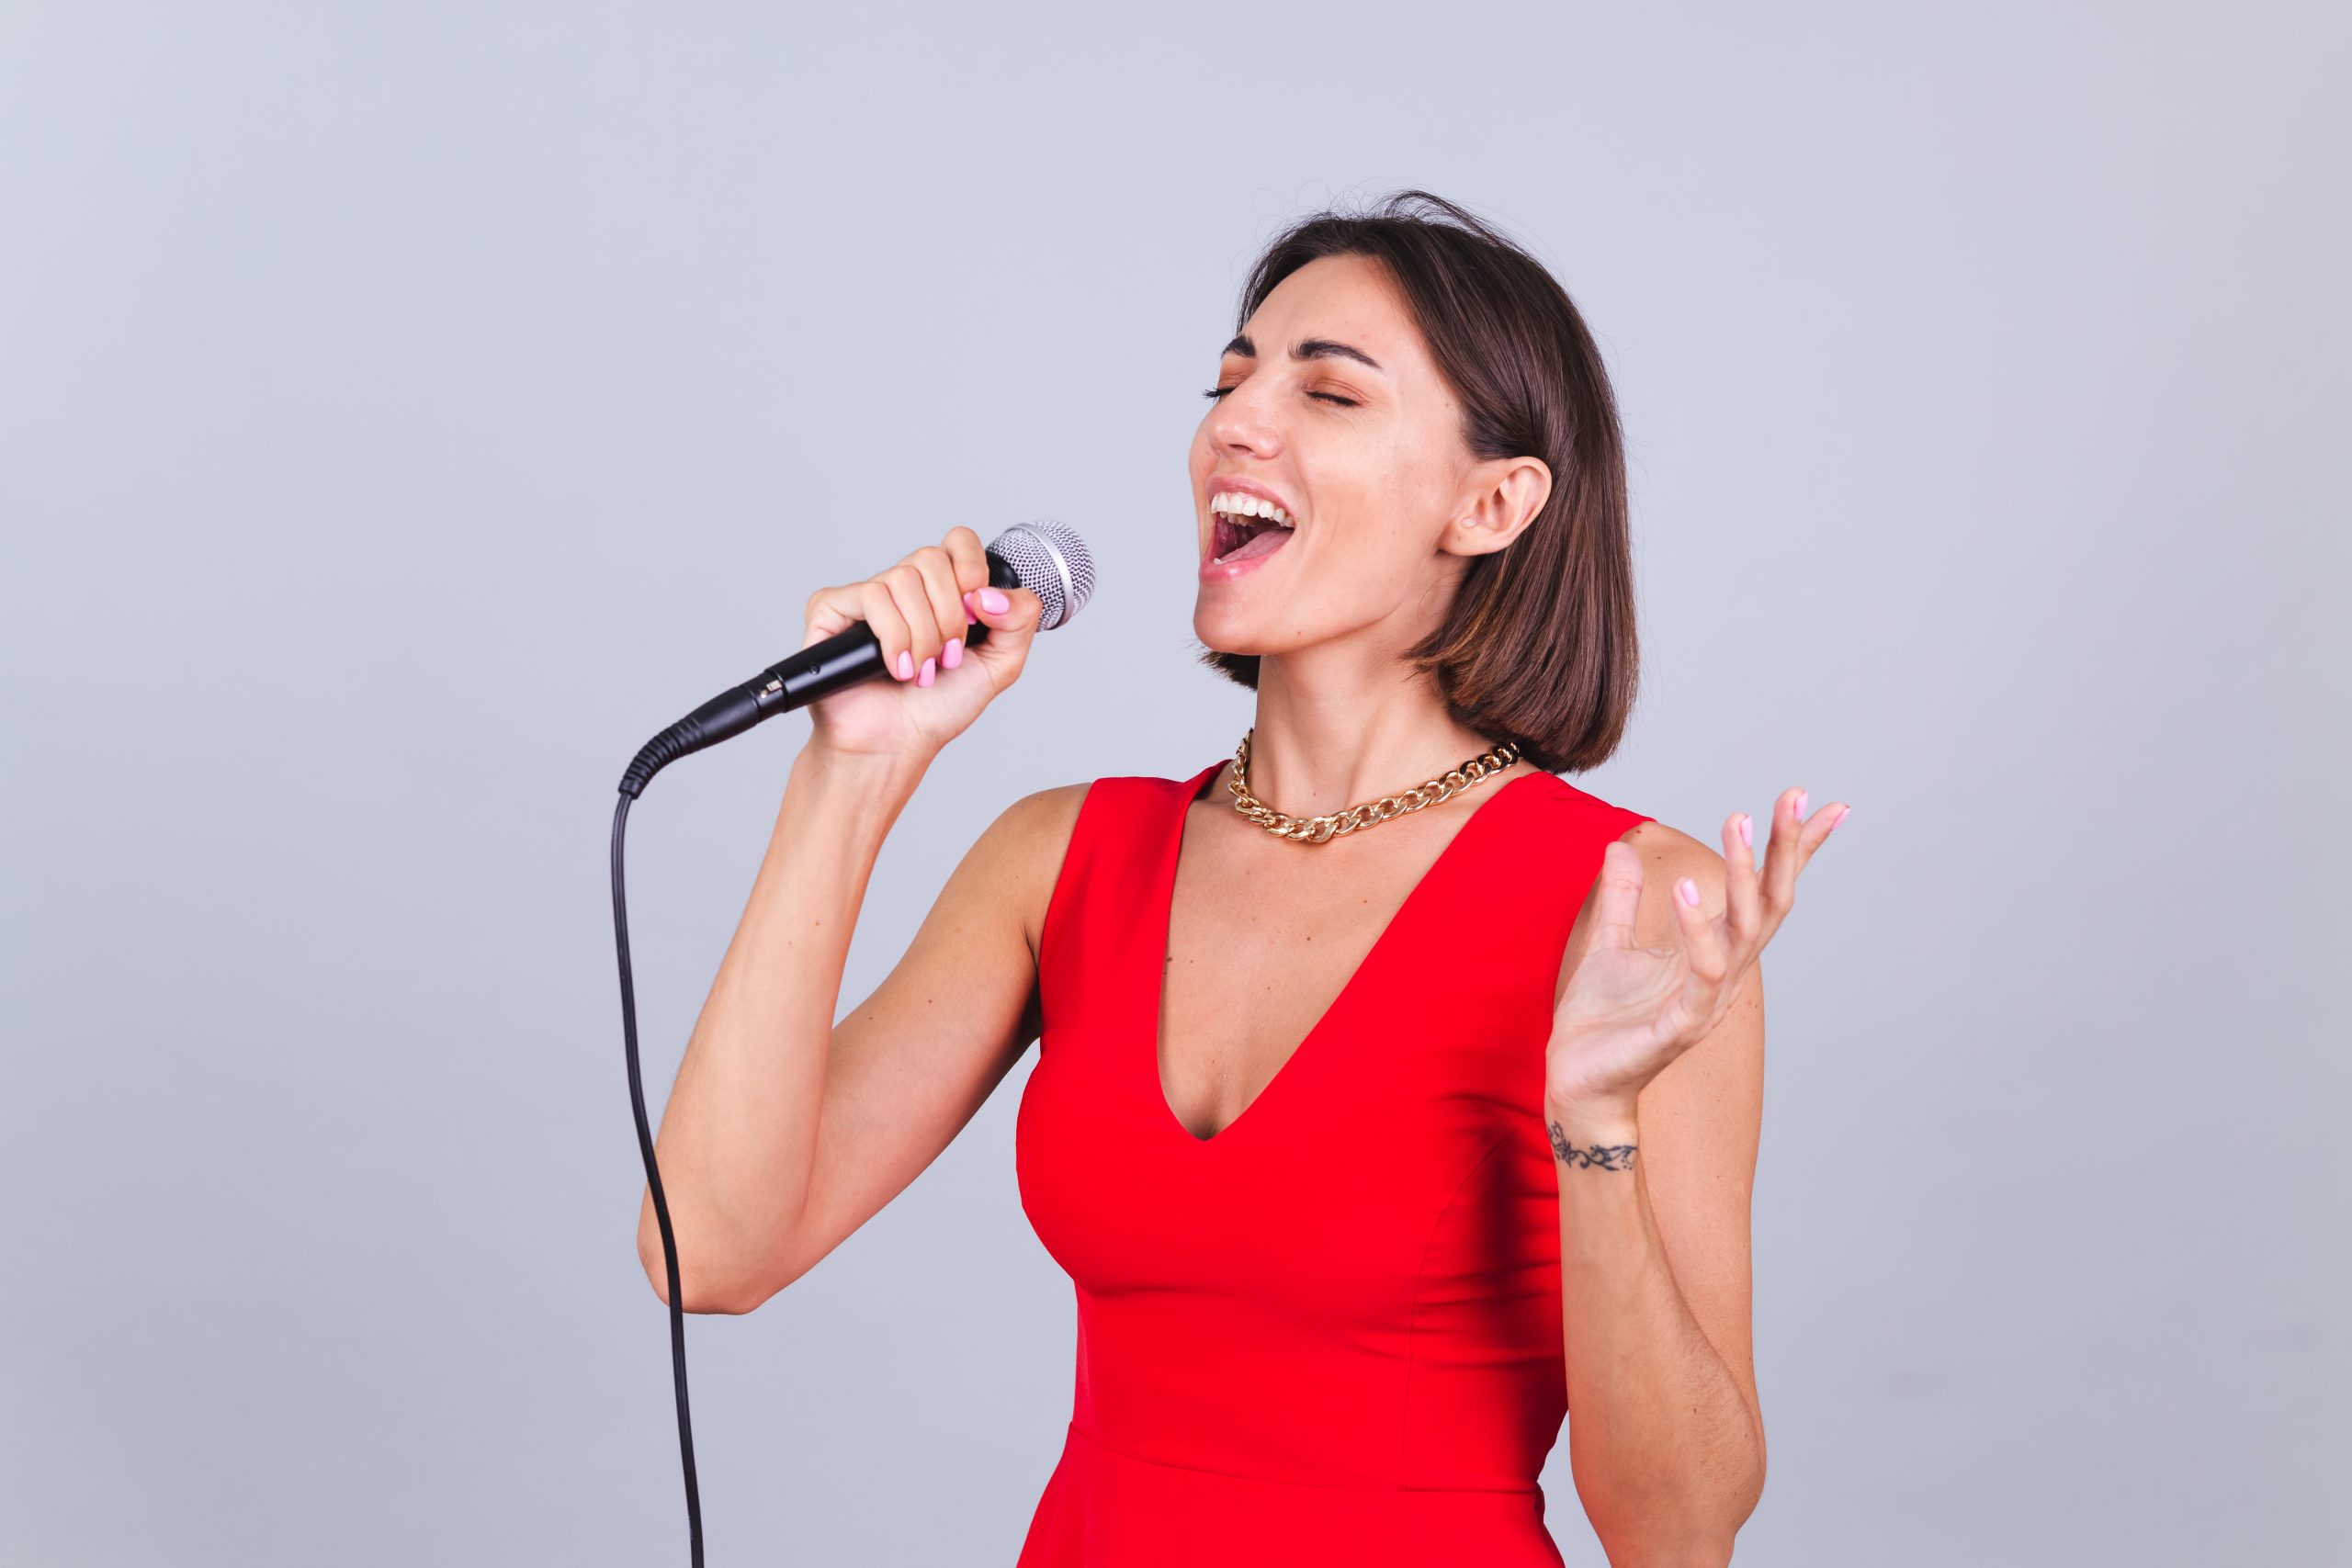 Beautiful woman on gray background with microphone singing emotional favorite song happy positive cheerful